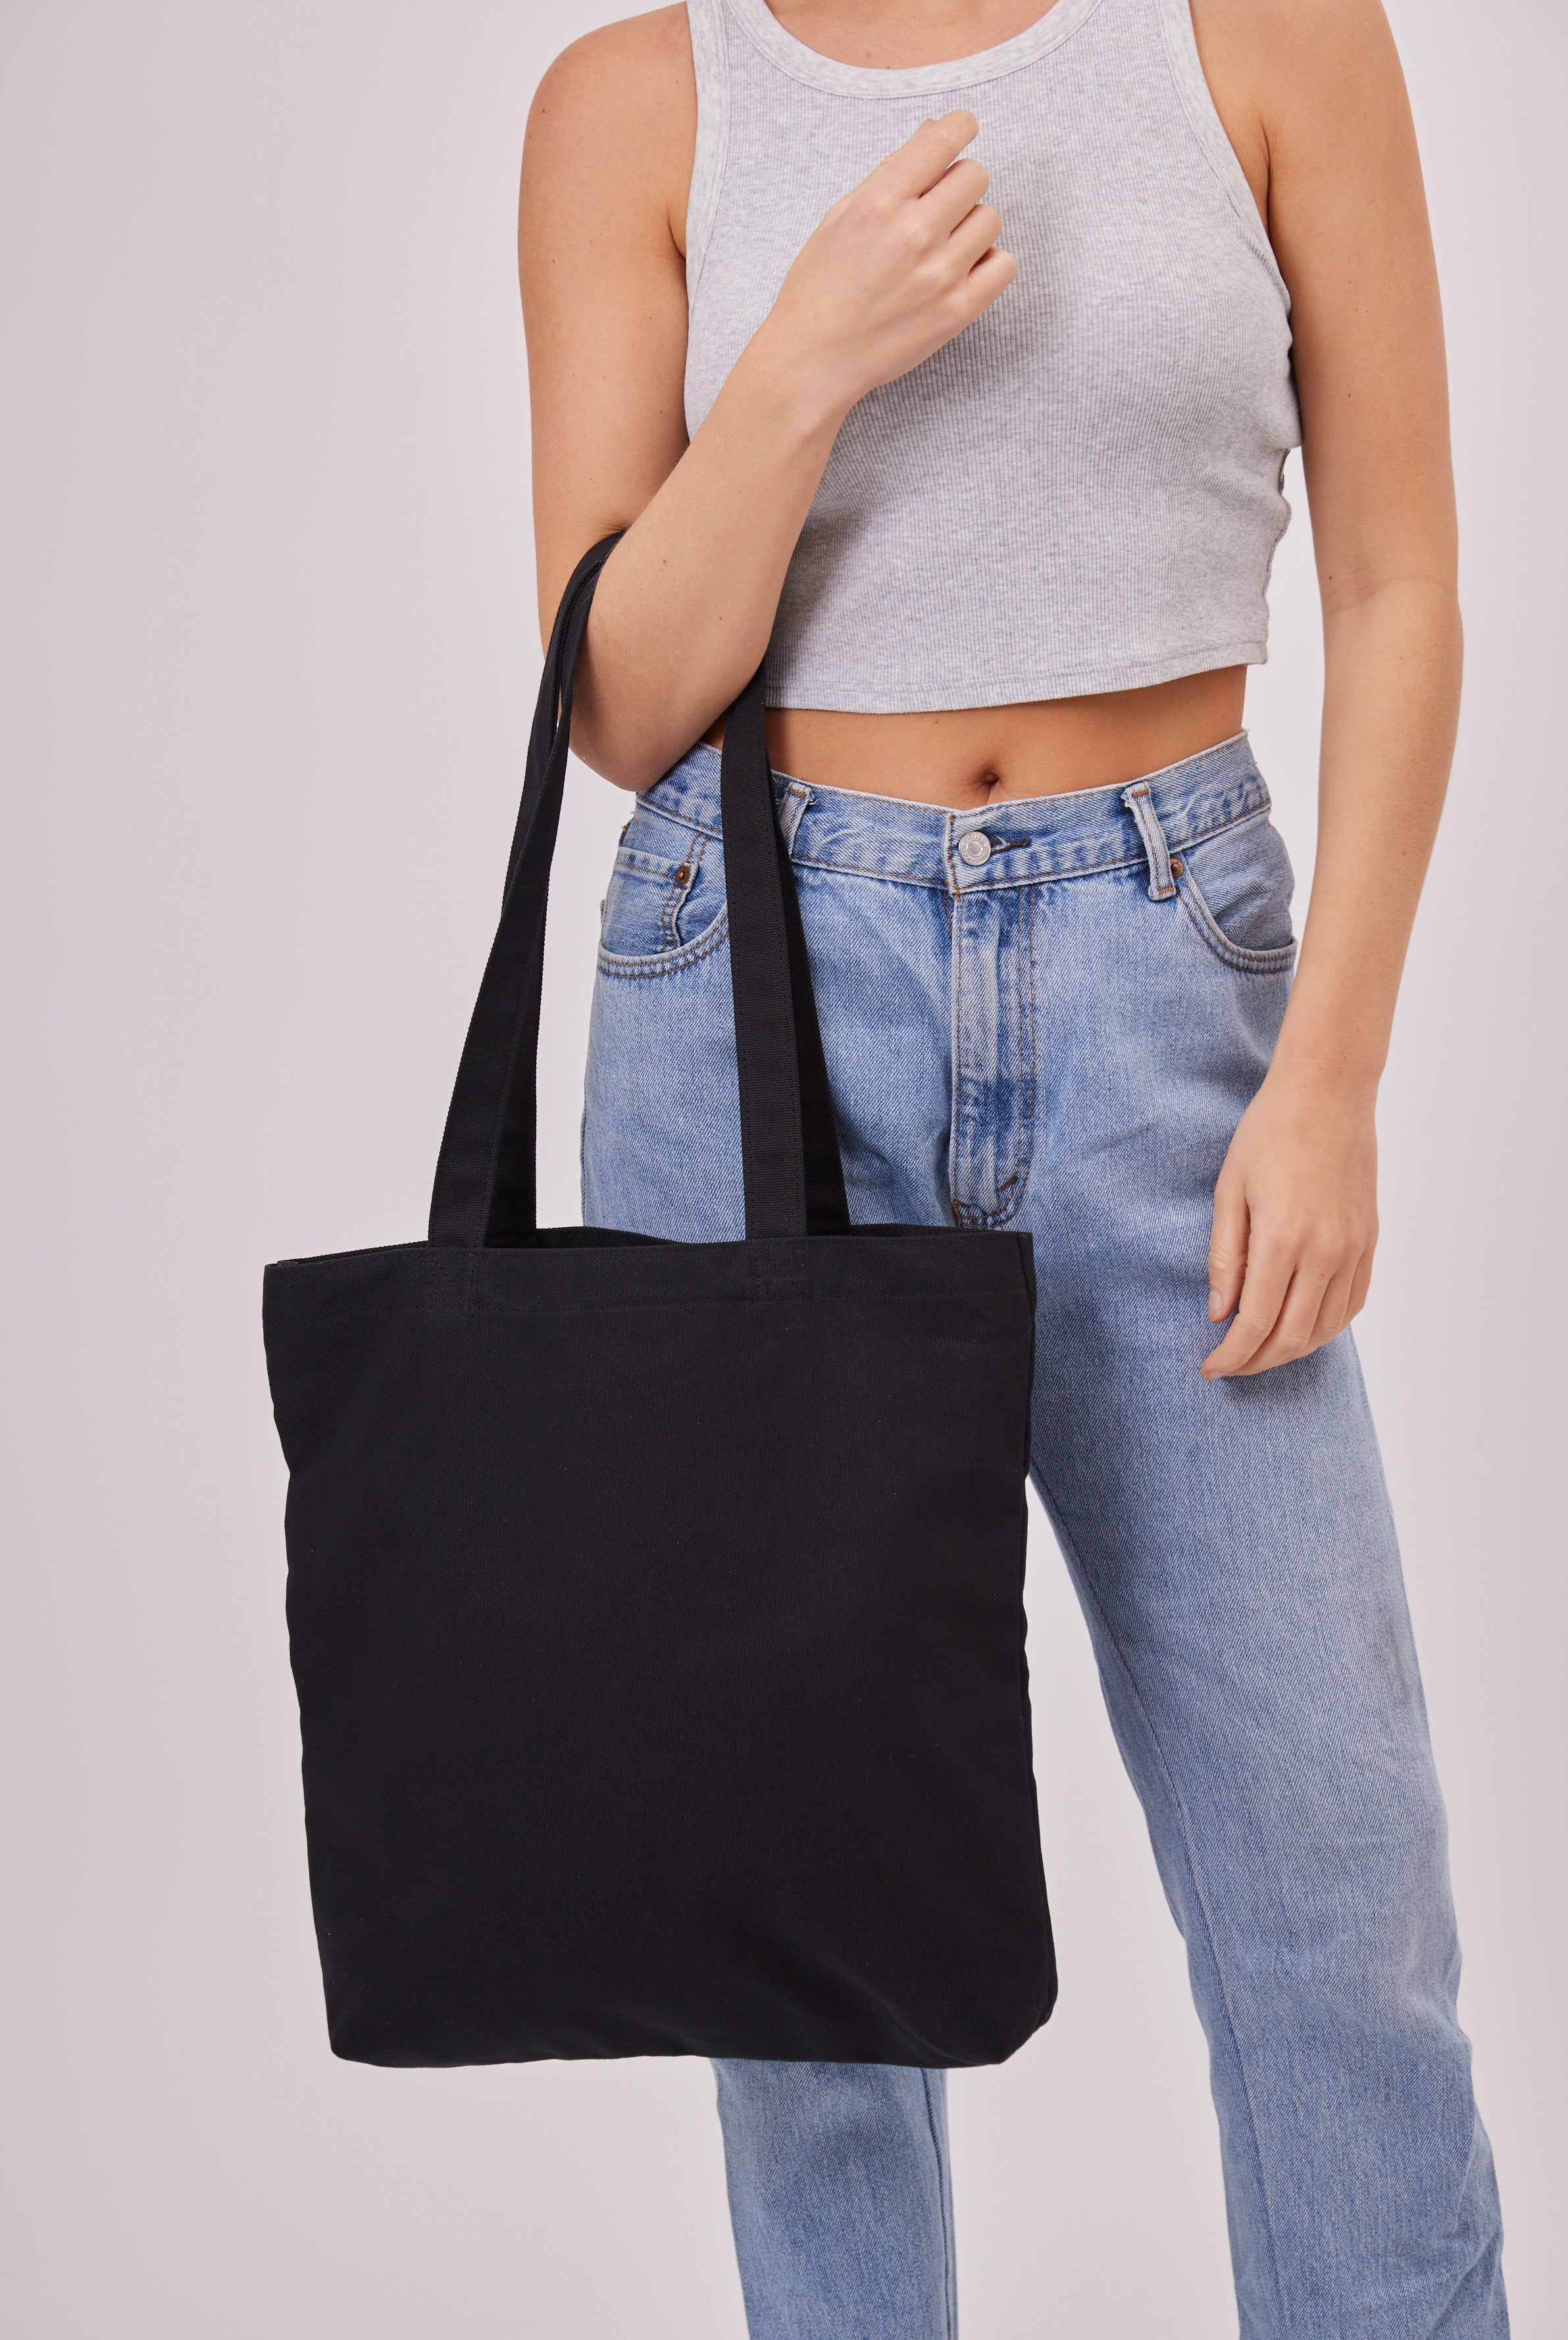 Canvas Tote Bag in Black | casual | minimal | basics | streetwear | streetstyle | unisex | bag | shopper | accessories | accessory | bags | women's accessories 